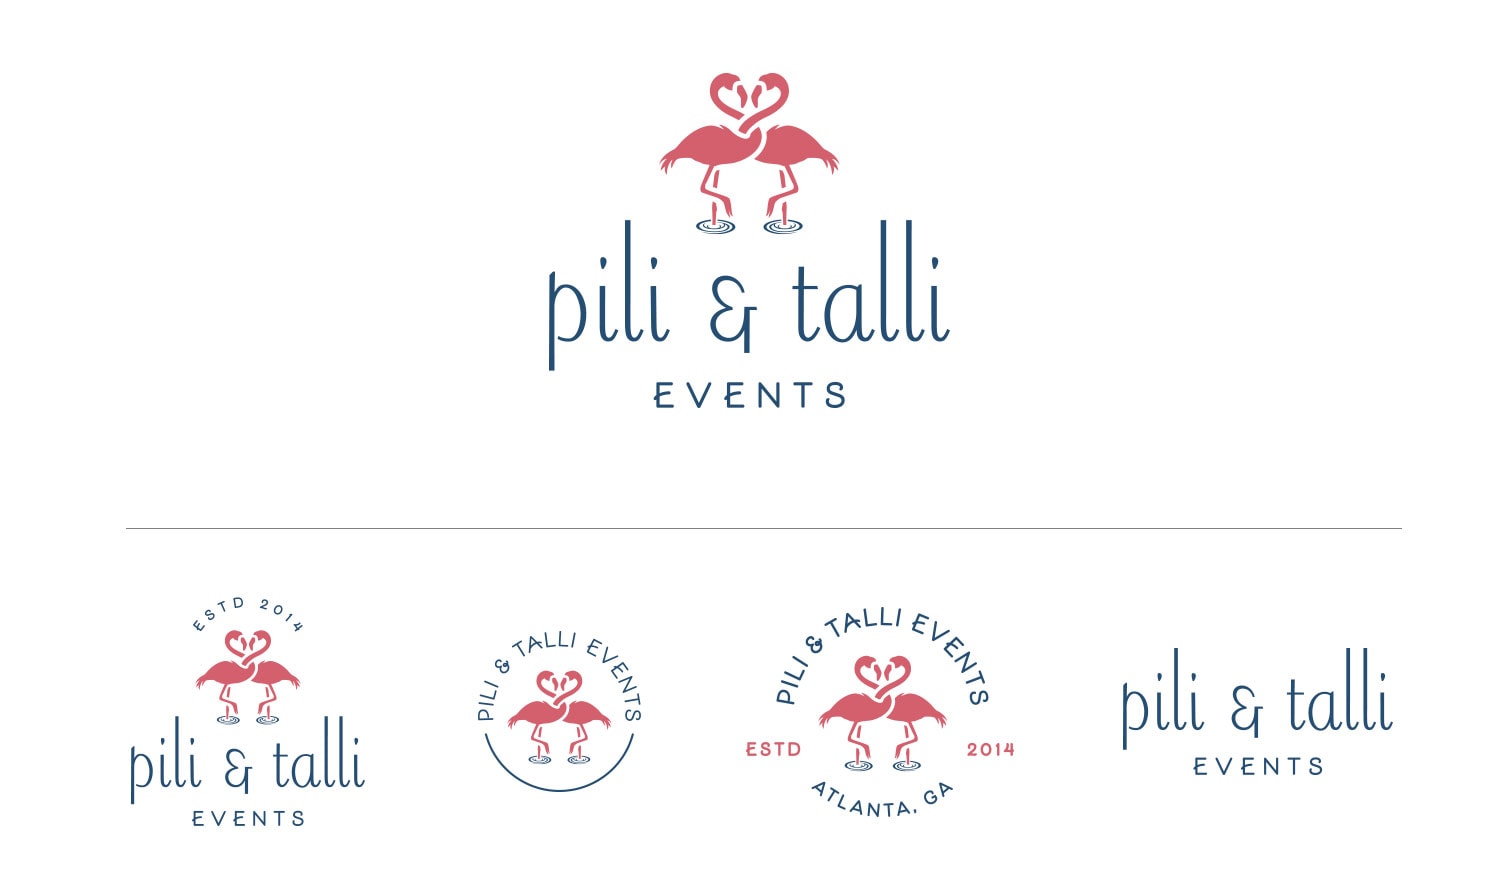 Pili & Talli Events is a wedding & event planning business and after a few years in business, working with a ready-made logo purchased off Etsy, they felt ready to invest in their branding design in order to reach more of their ideal clients and grow their business.